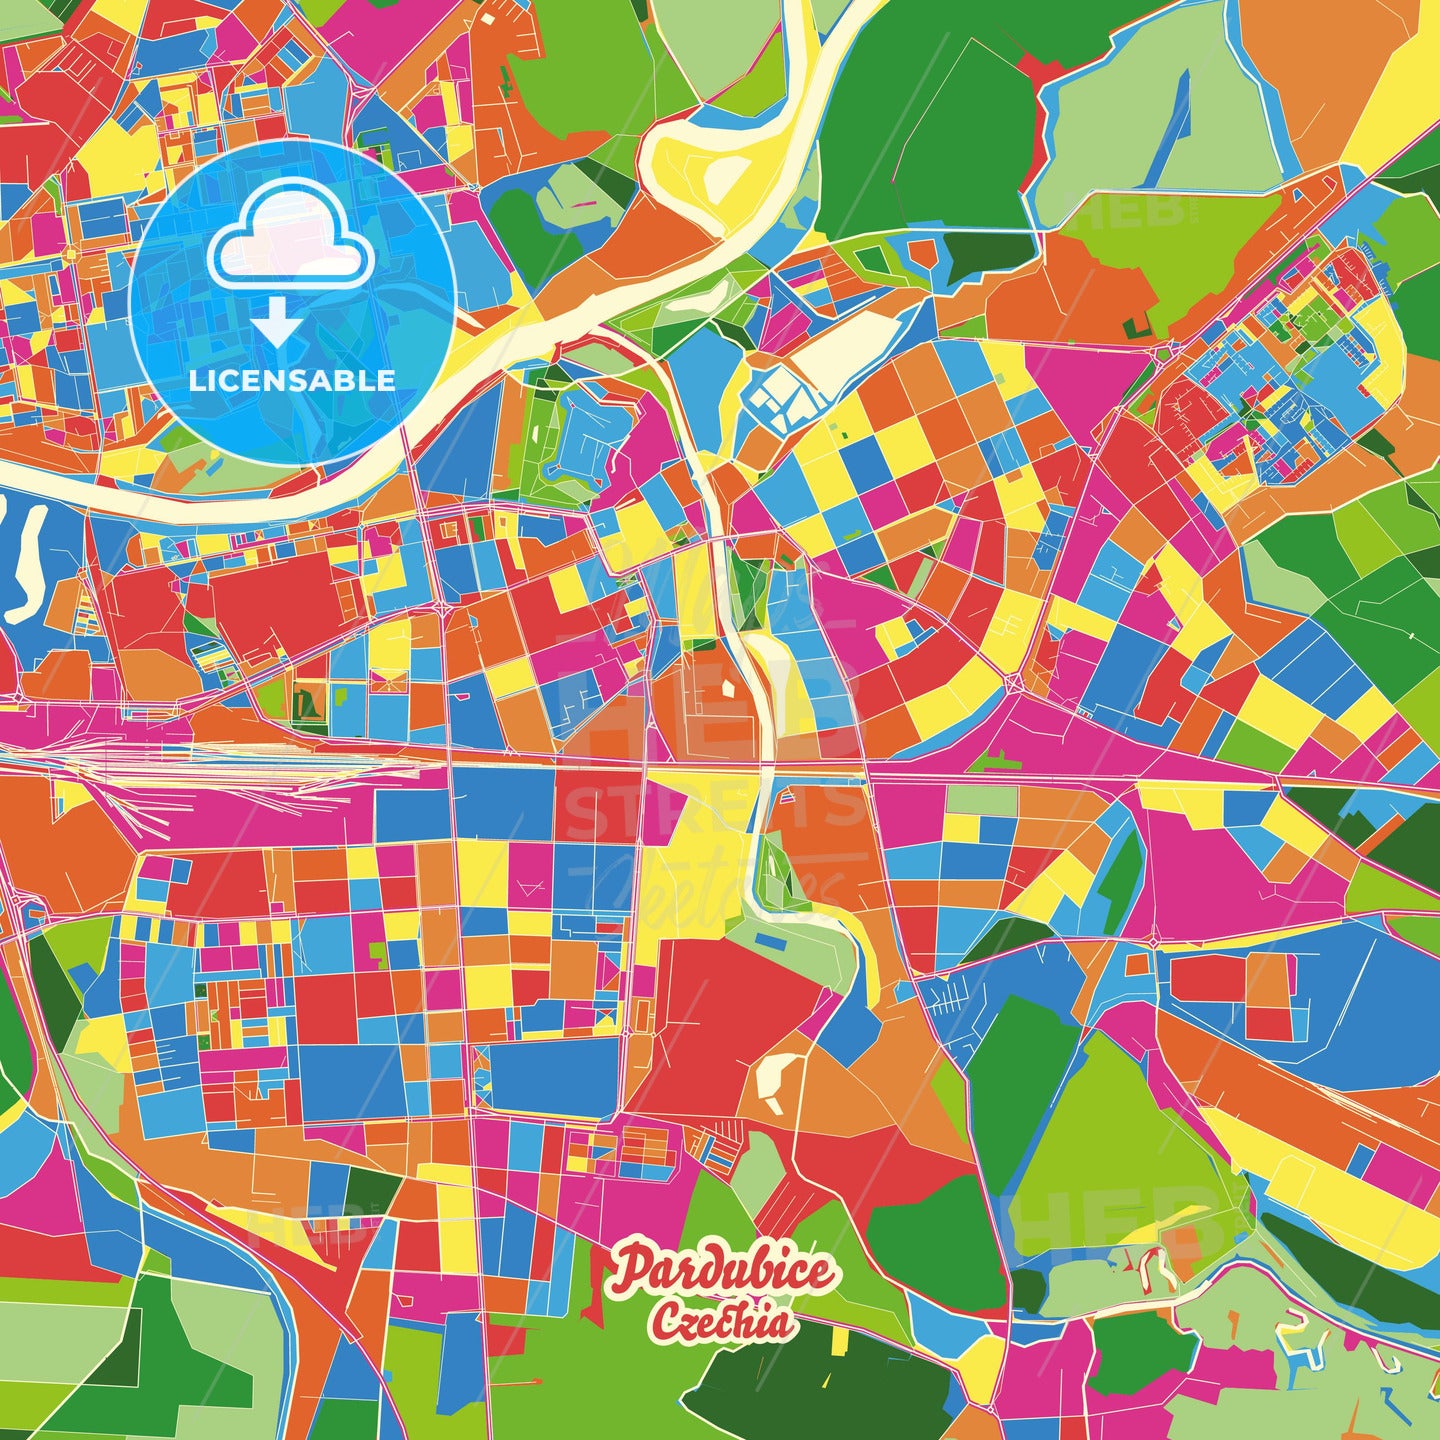 Pardubice, Czechia Crazy Colorful Street Map Poster Template - HEBSTREITS Sketches